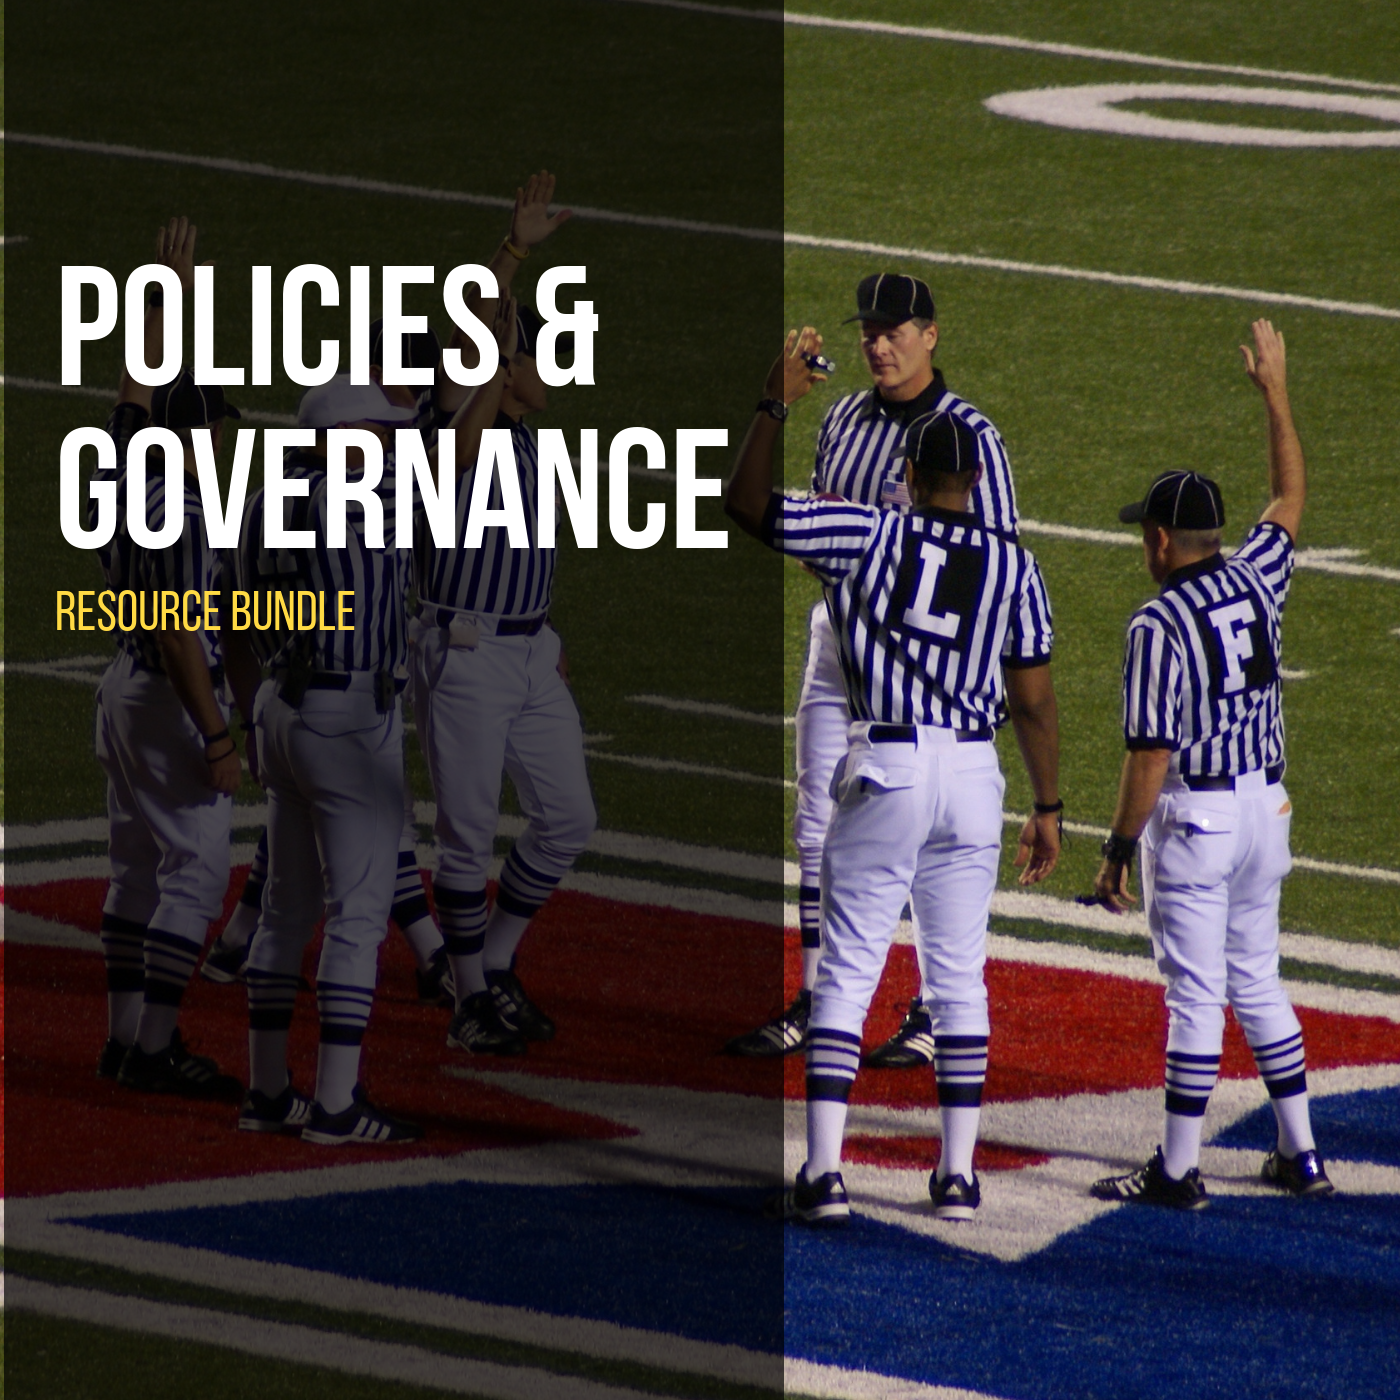 Online community policies and governance